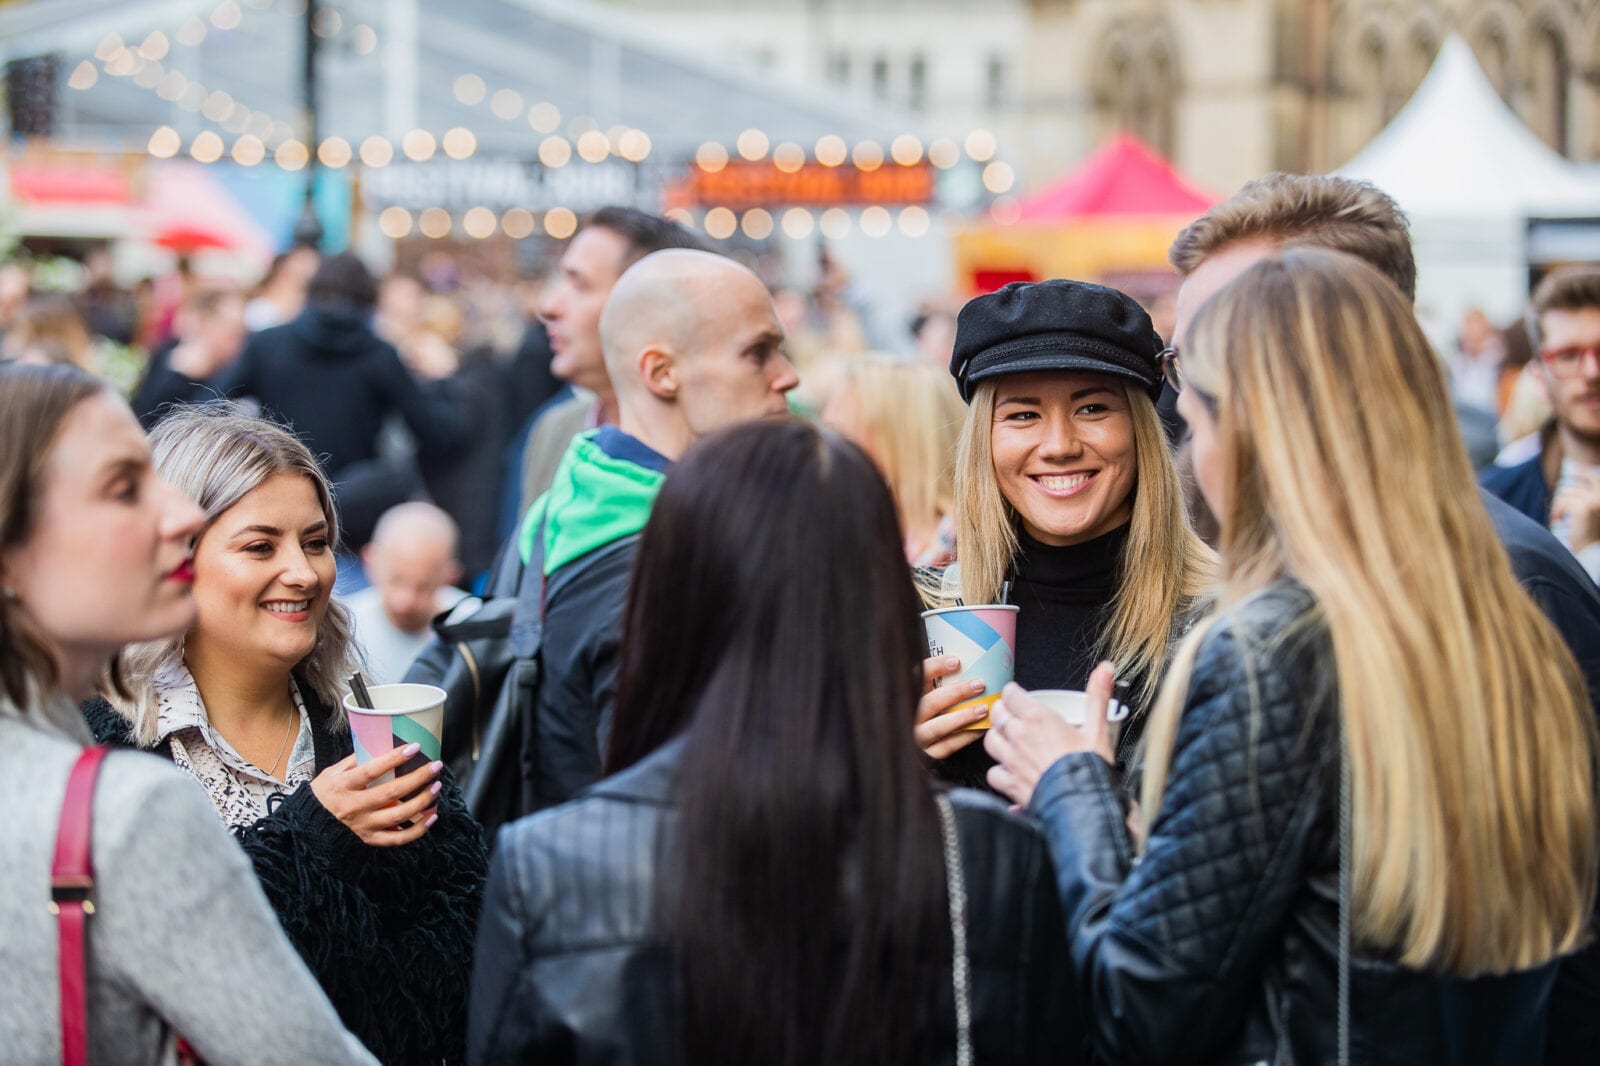 Manchester Food and Drink Festival announces dates for its 2021 return, The Manc